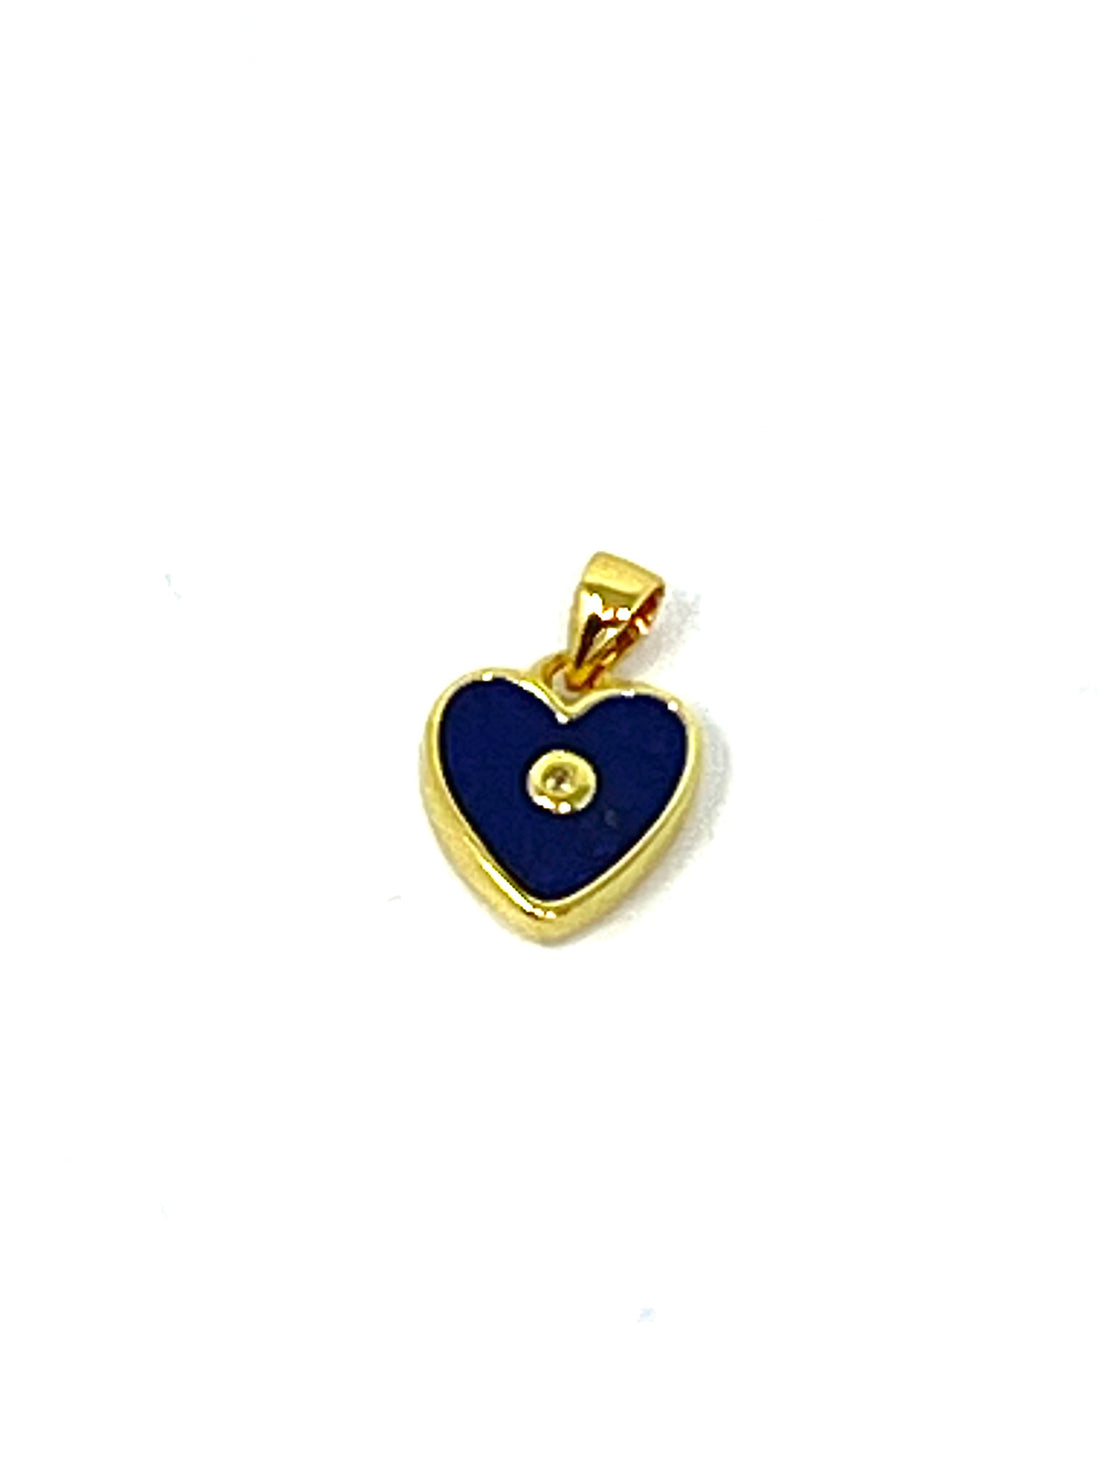 Charming Heart Charm with Single CZ in Blue Lapis